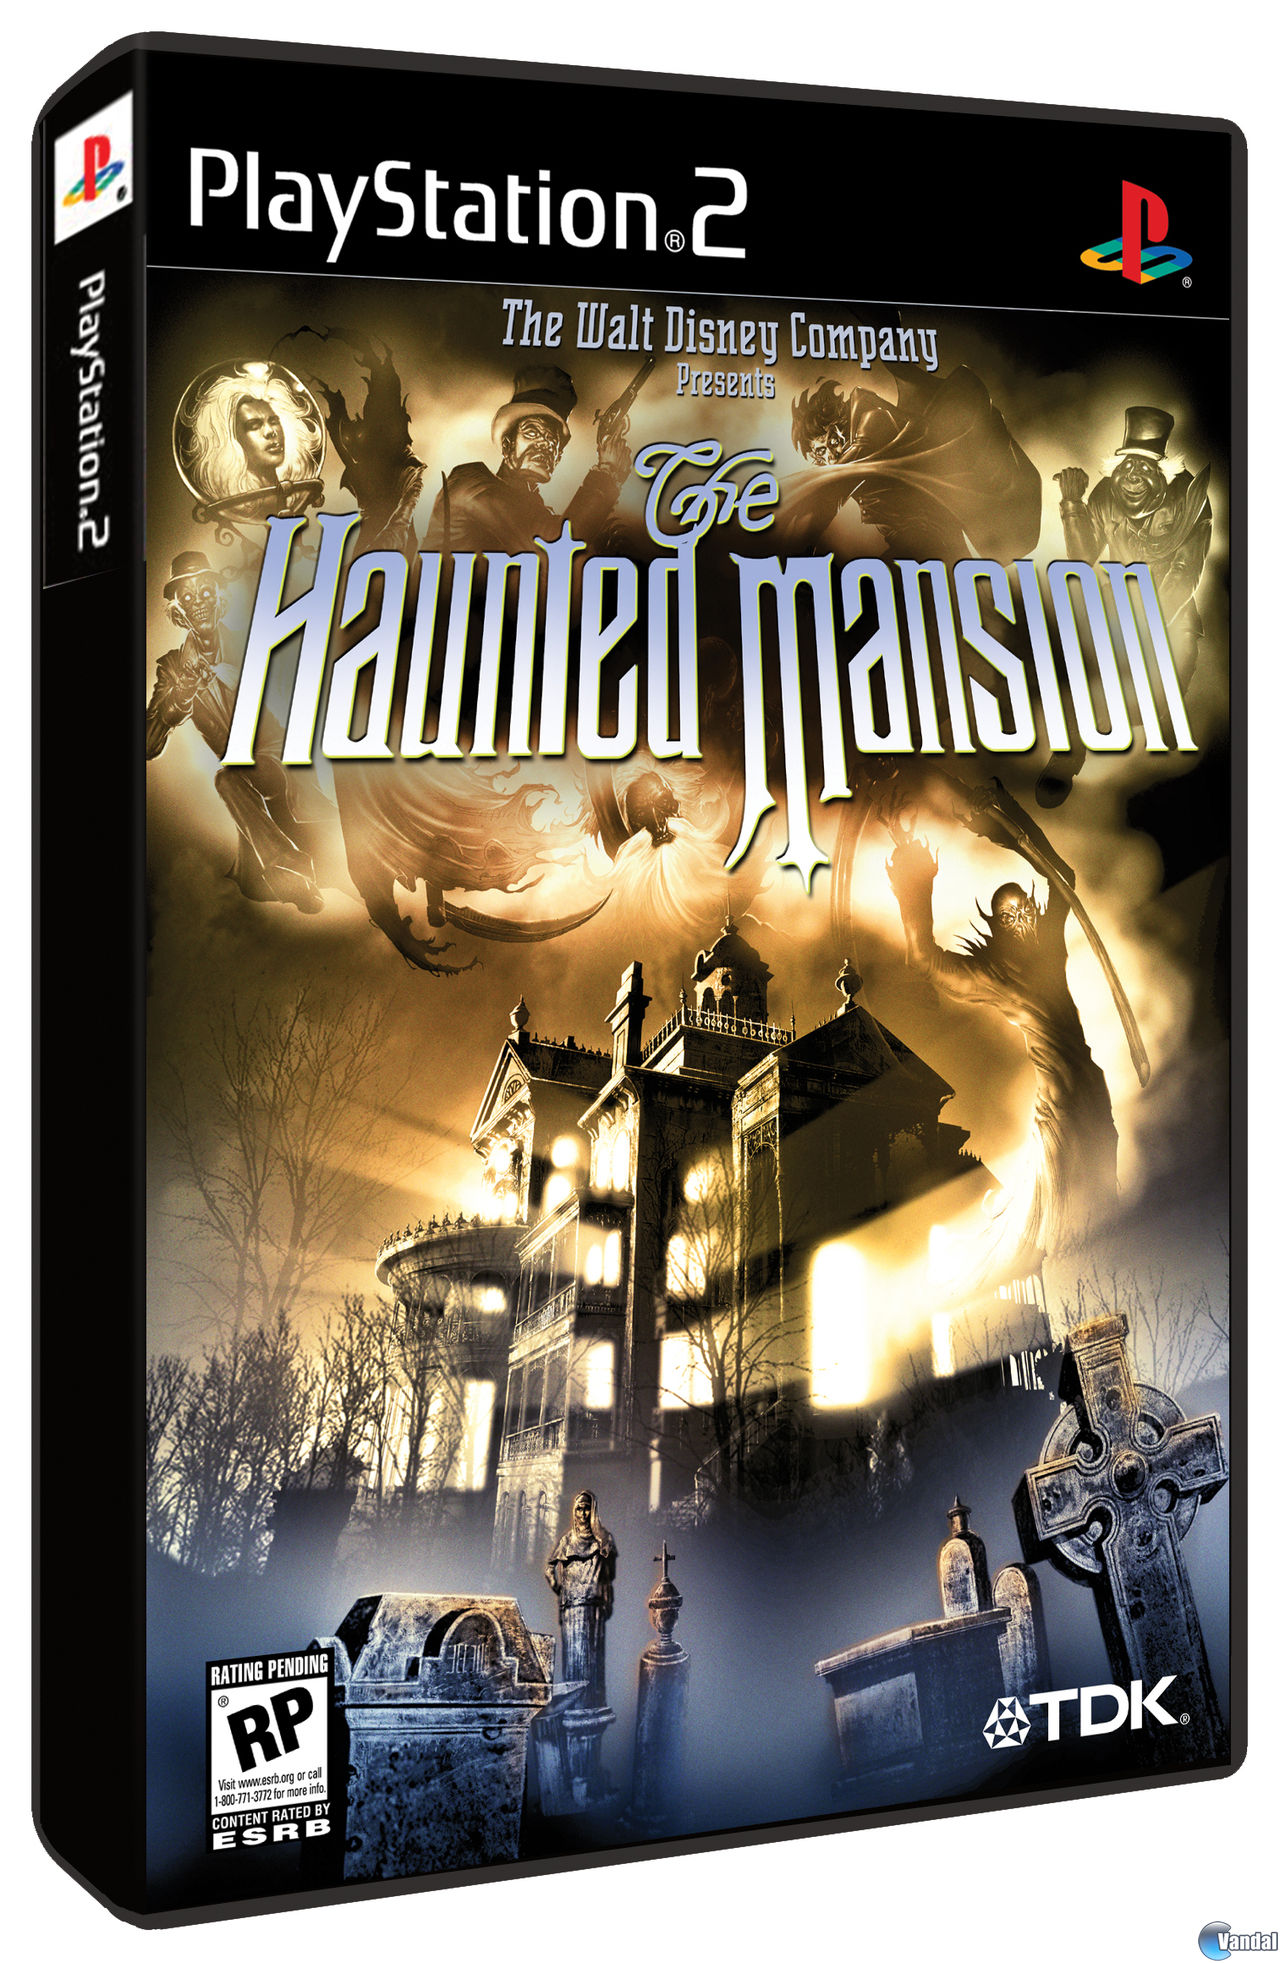 Haunted mansion 2. The Haunted Mansion ps2. Haunted Castle ps2. ПС 2 the Haunted Mansion. Haunted Mansion game.